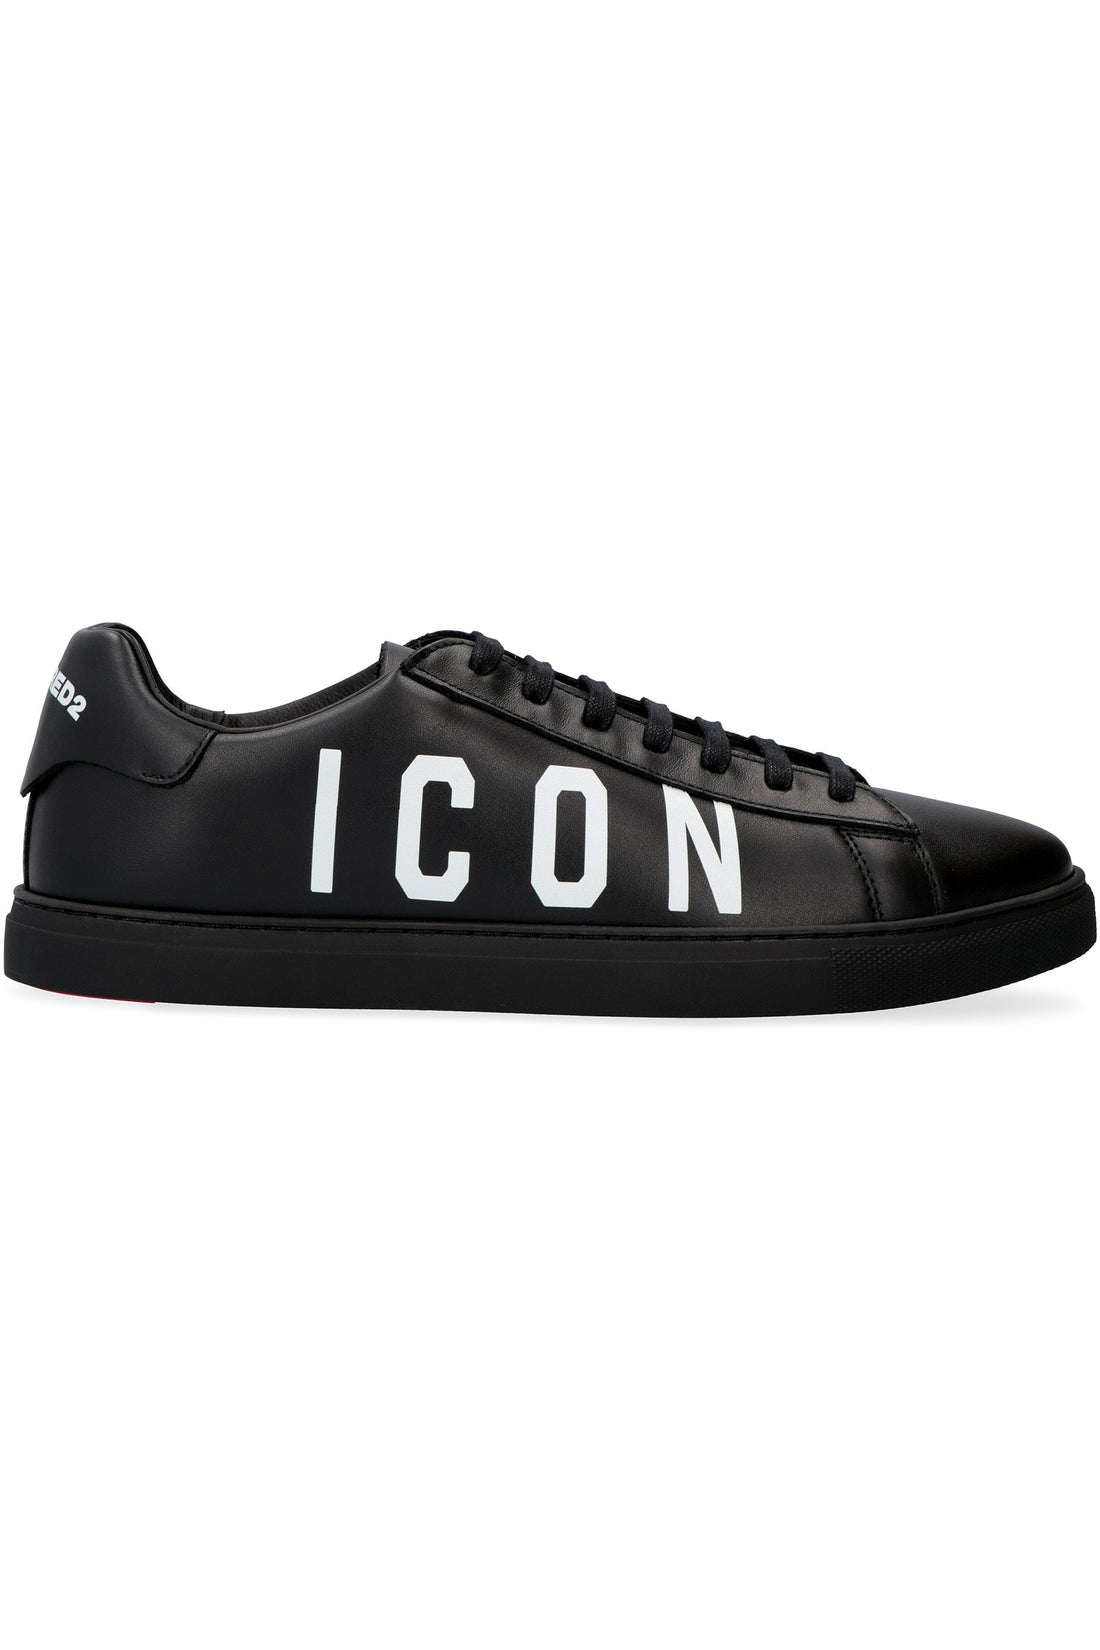 Dsquared2-OUTLET-SALE-New Tennis leather low-top sneakers-ARCHIVIST